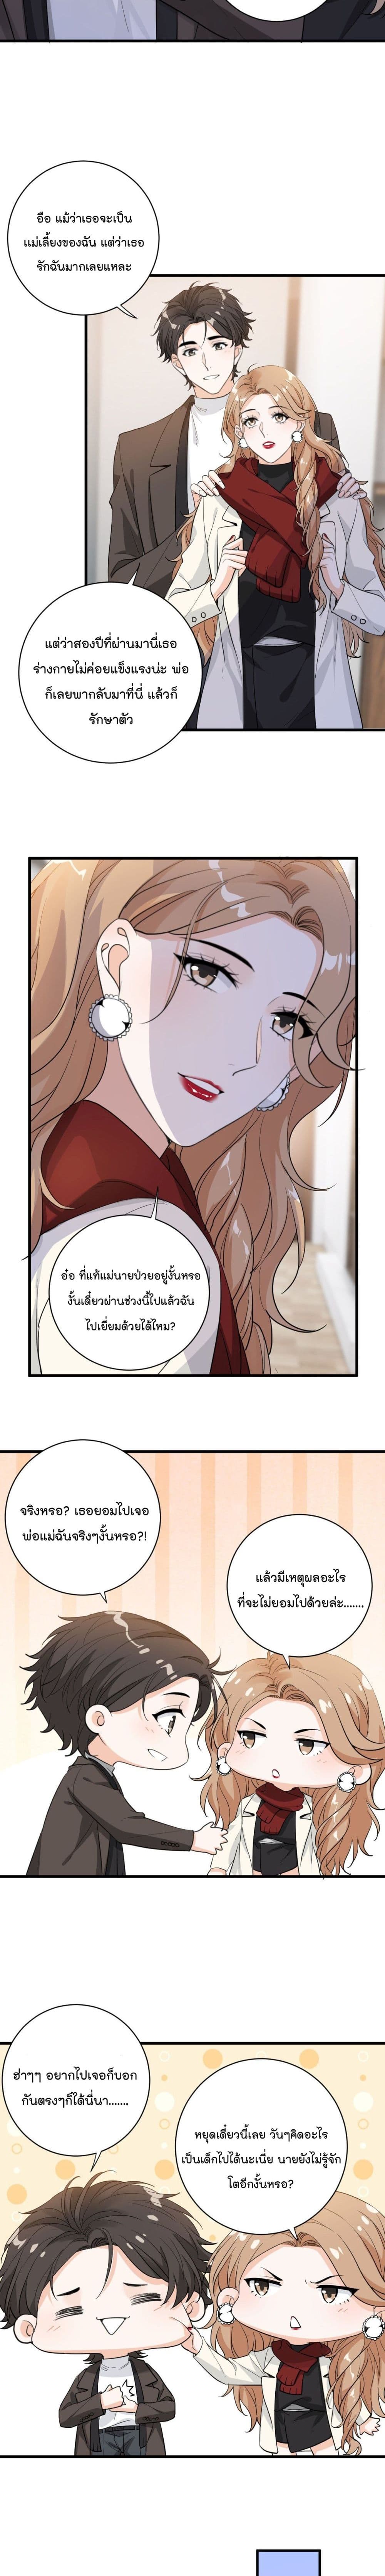 The Faded Memory - หน้า 5